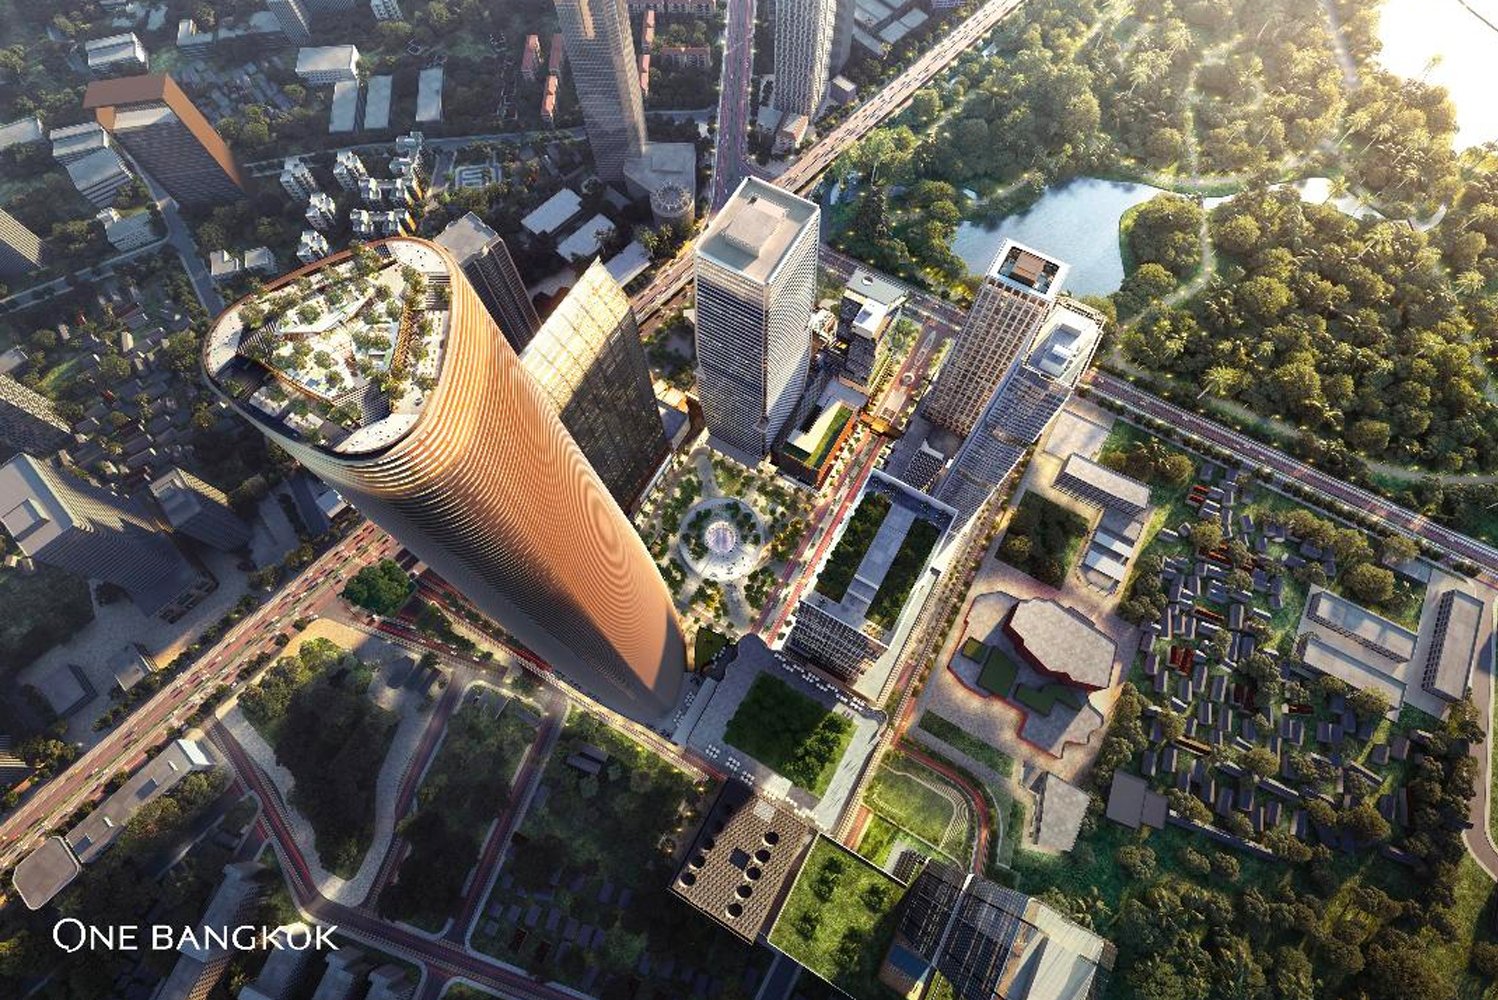 Urban designer Skidmore Owings  Merrill and Thai architectural firm A49 created the One Bangkok mixed-use development